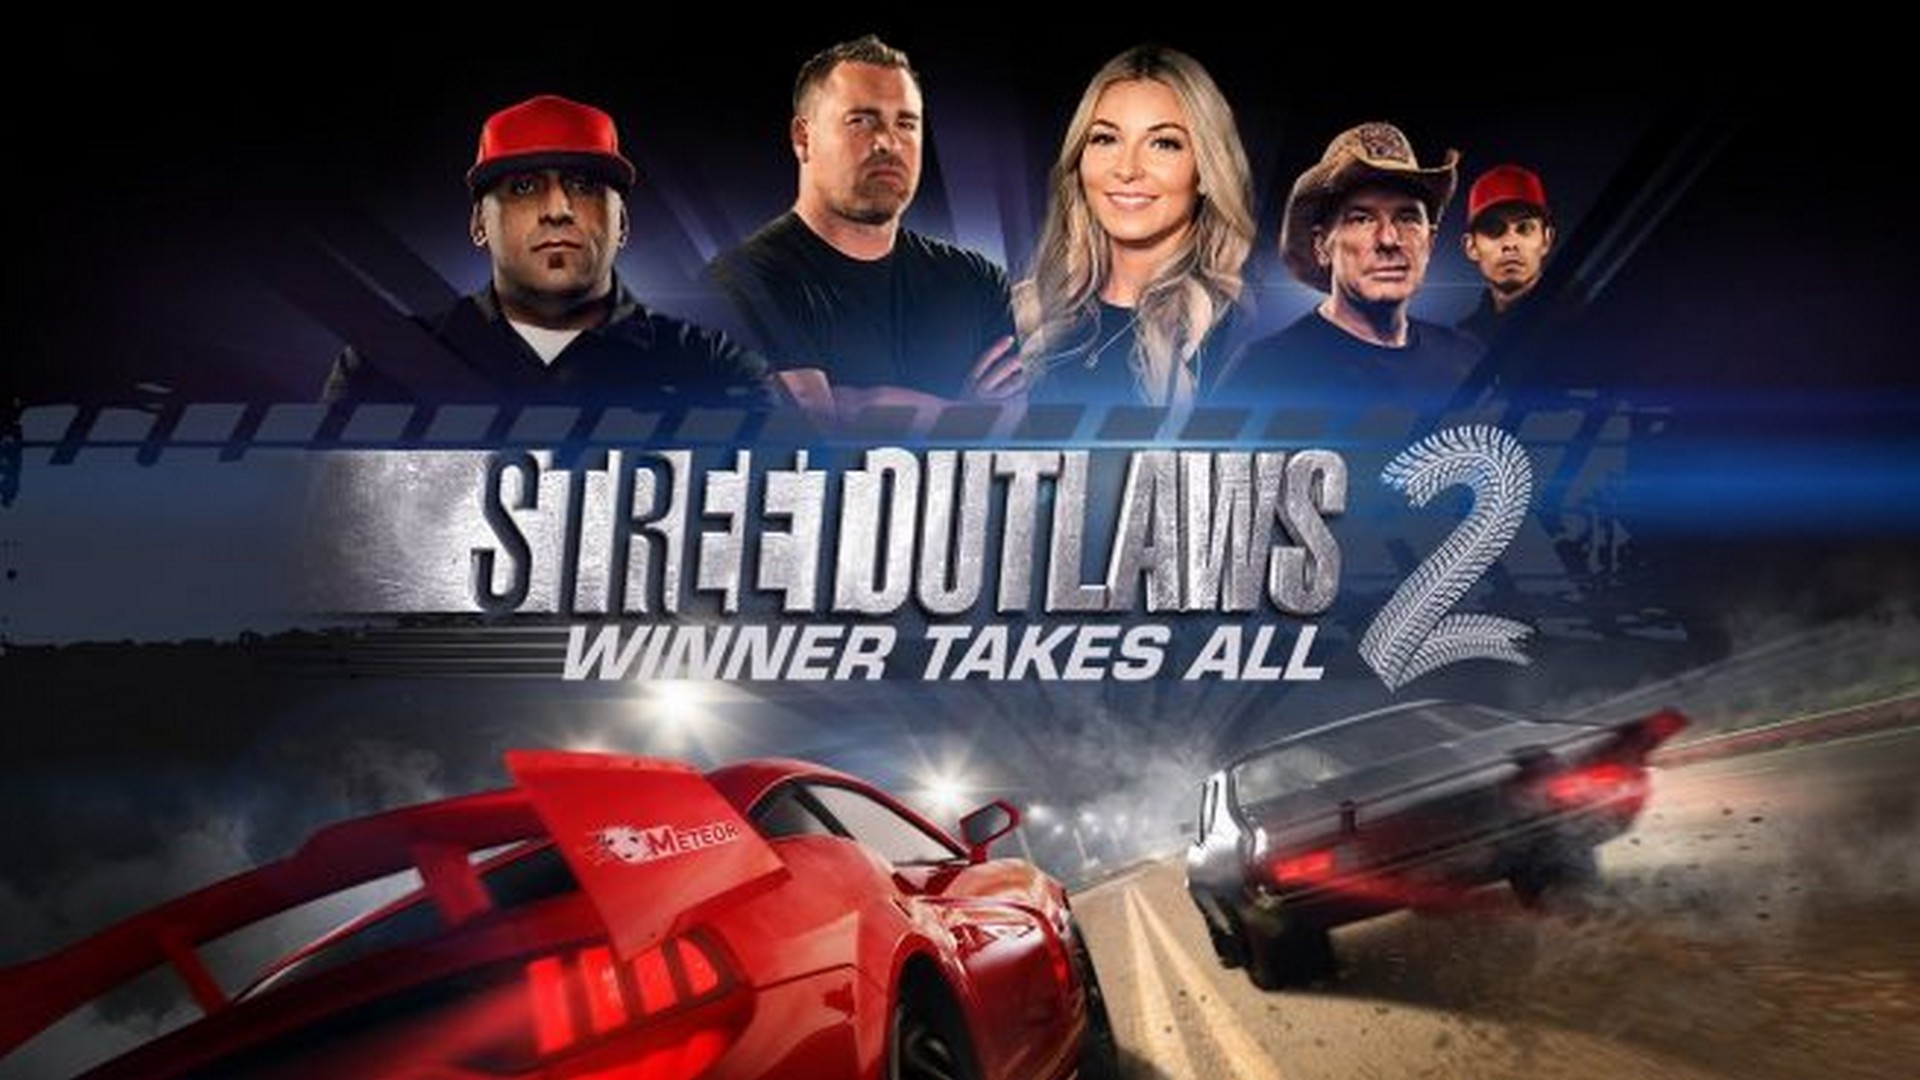 Race For The Win In Street Outlaws 2 Winner Takes All, the New Video